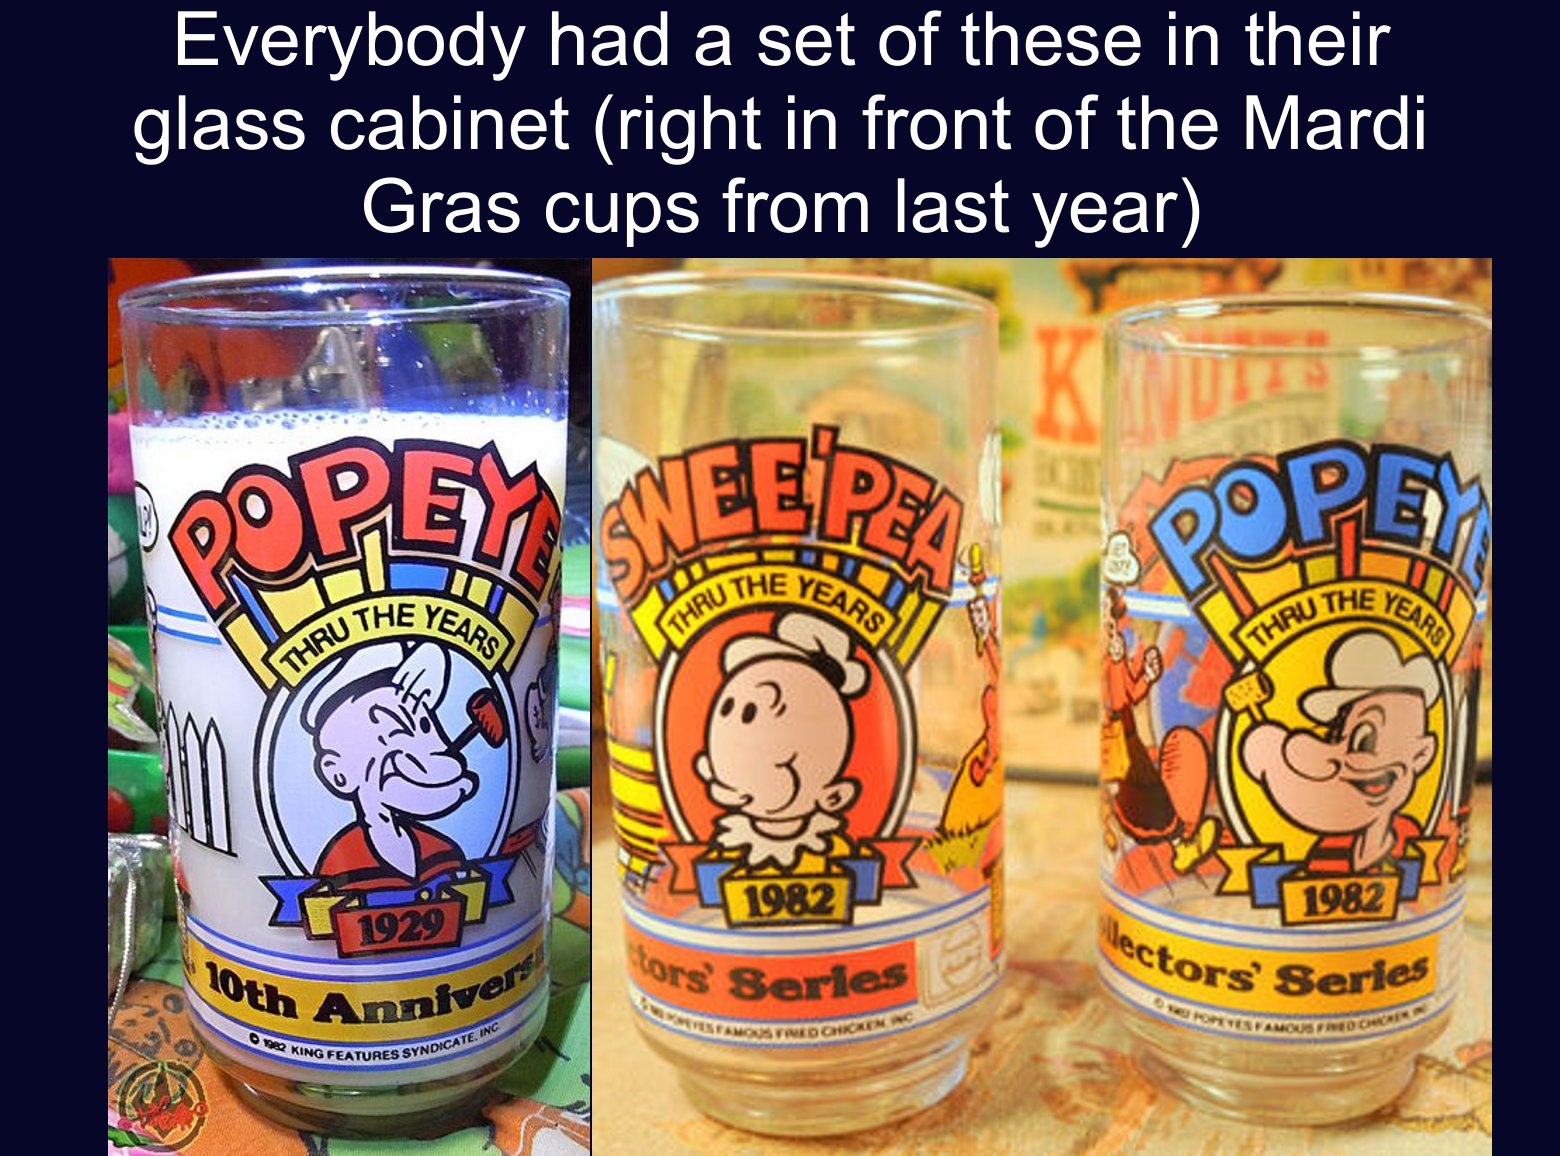 These glasses were in every kitchen during the 80s